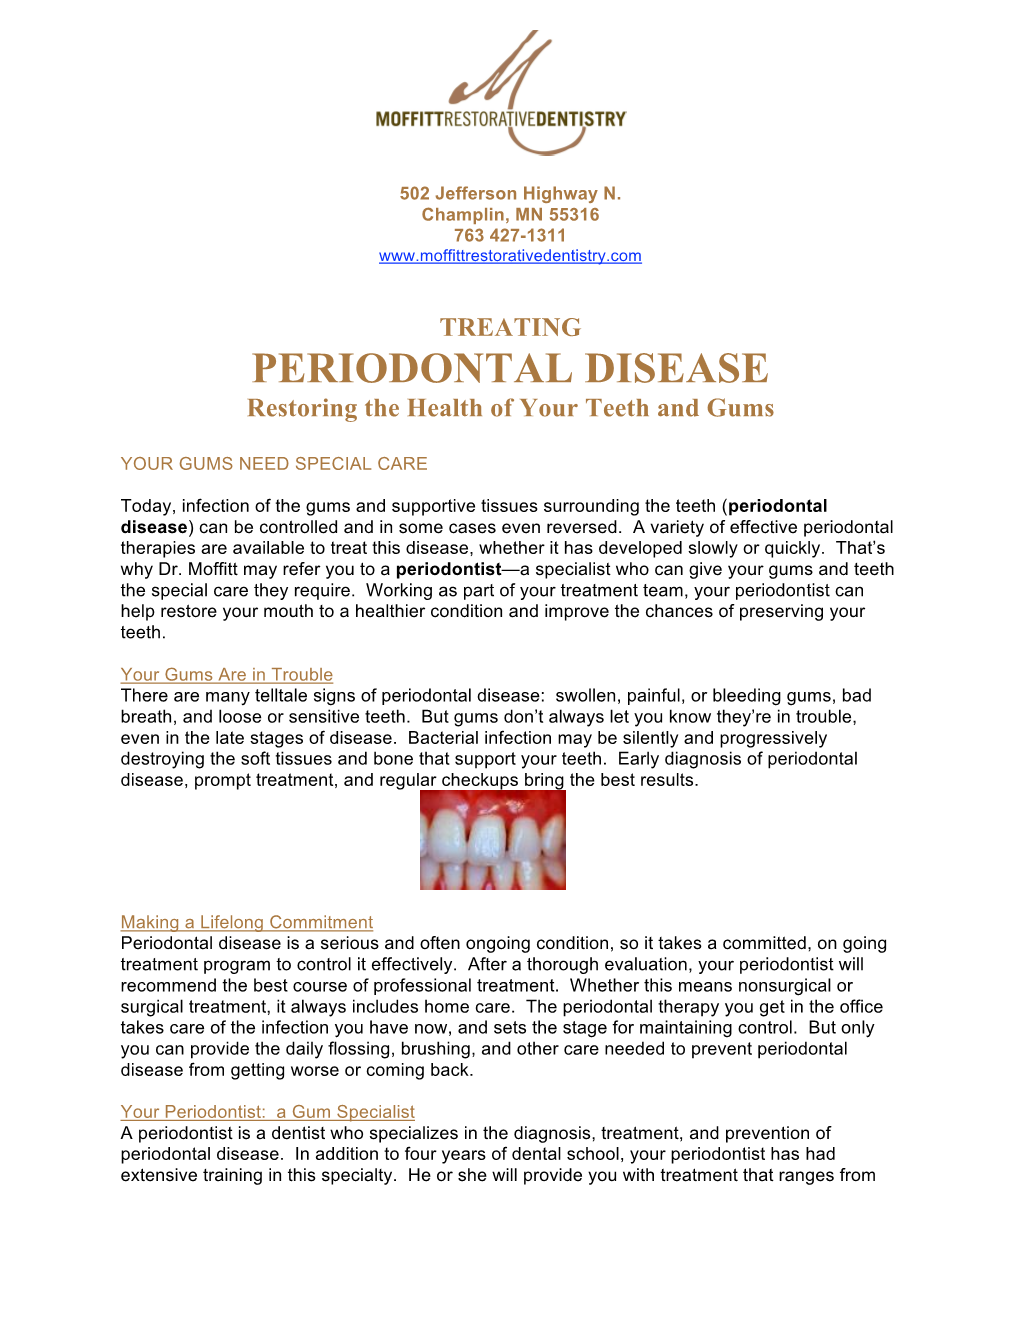 PERIODONTAL DISEASE Restoring the Health of Your Teeth and Gums